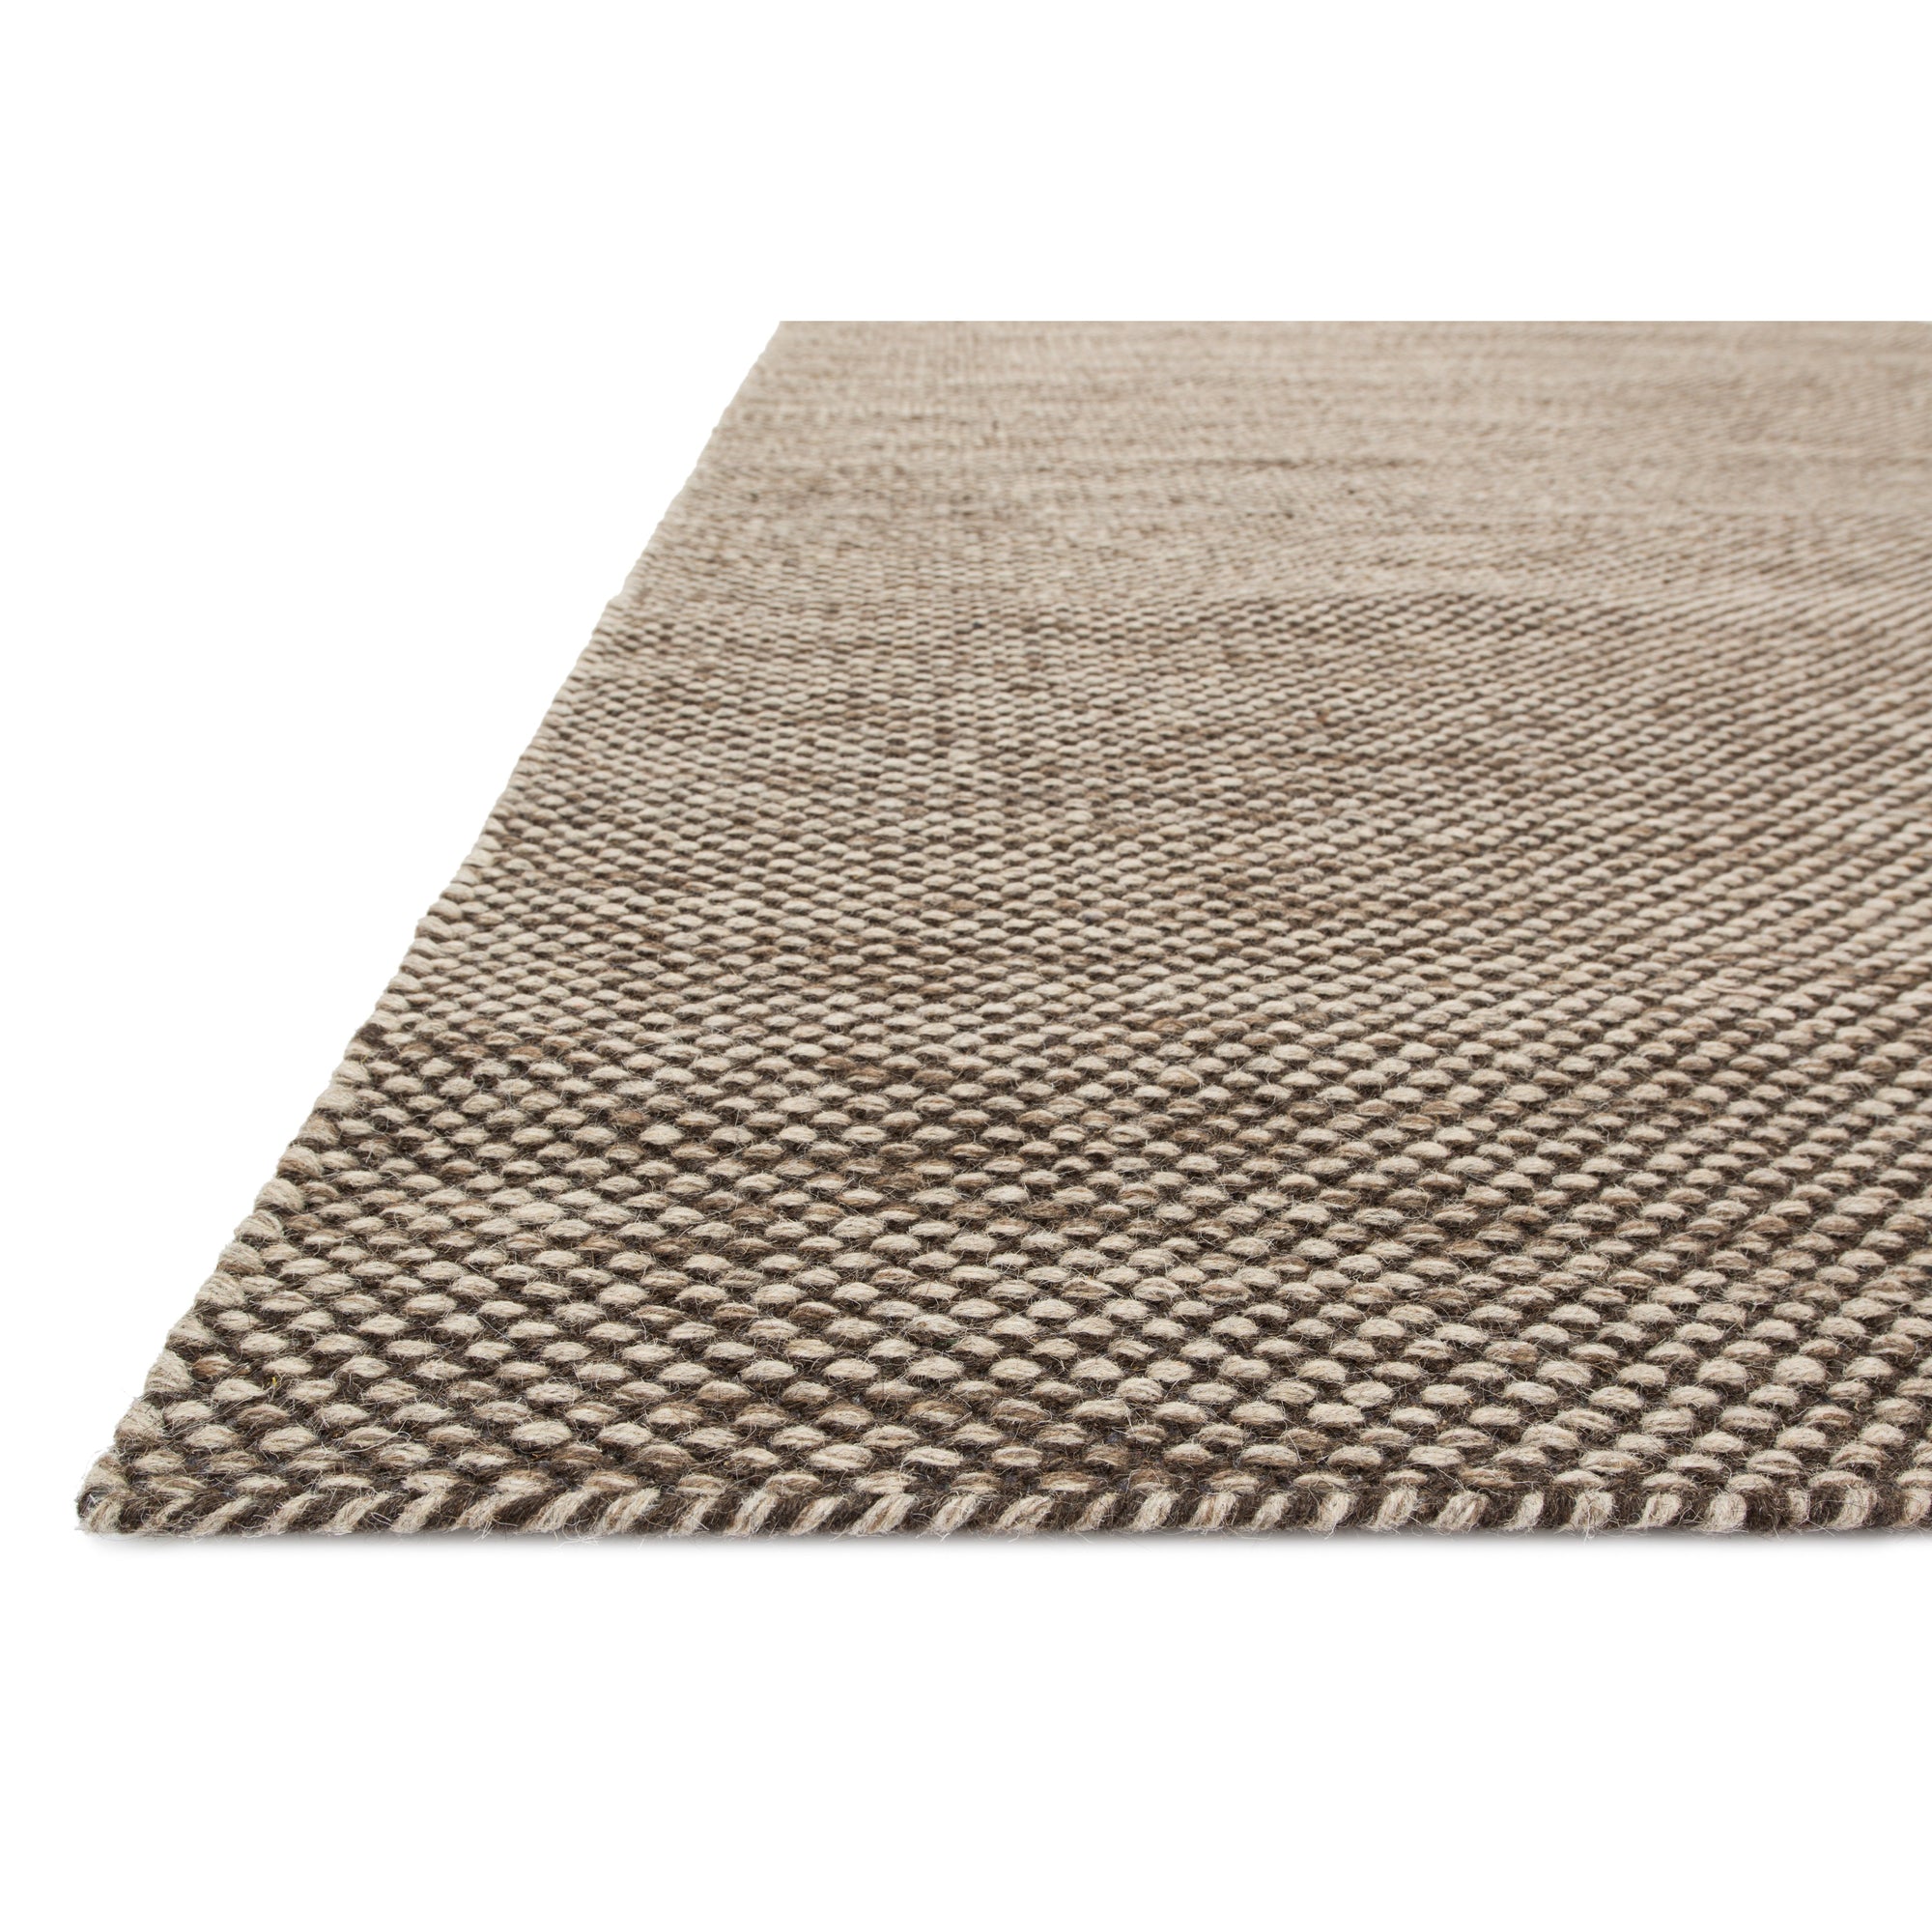 Rugs by Roo Loloi Oakwood Stone Area Rug in size 3' 6" x 5' 6"